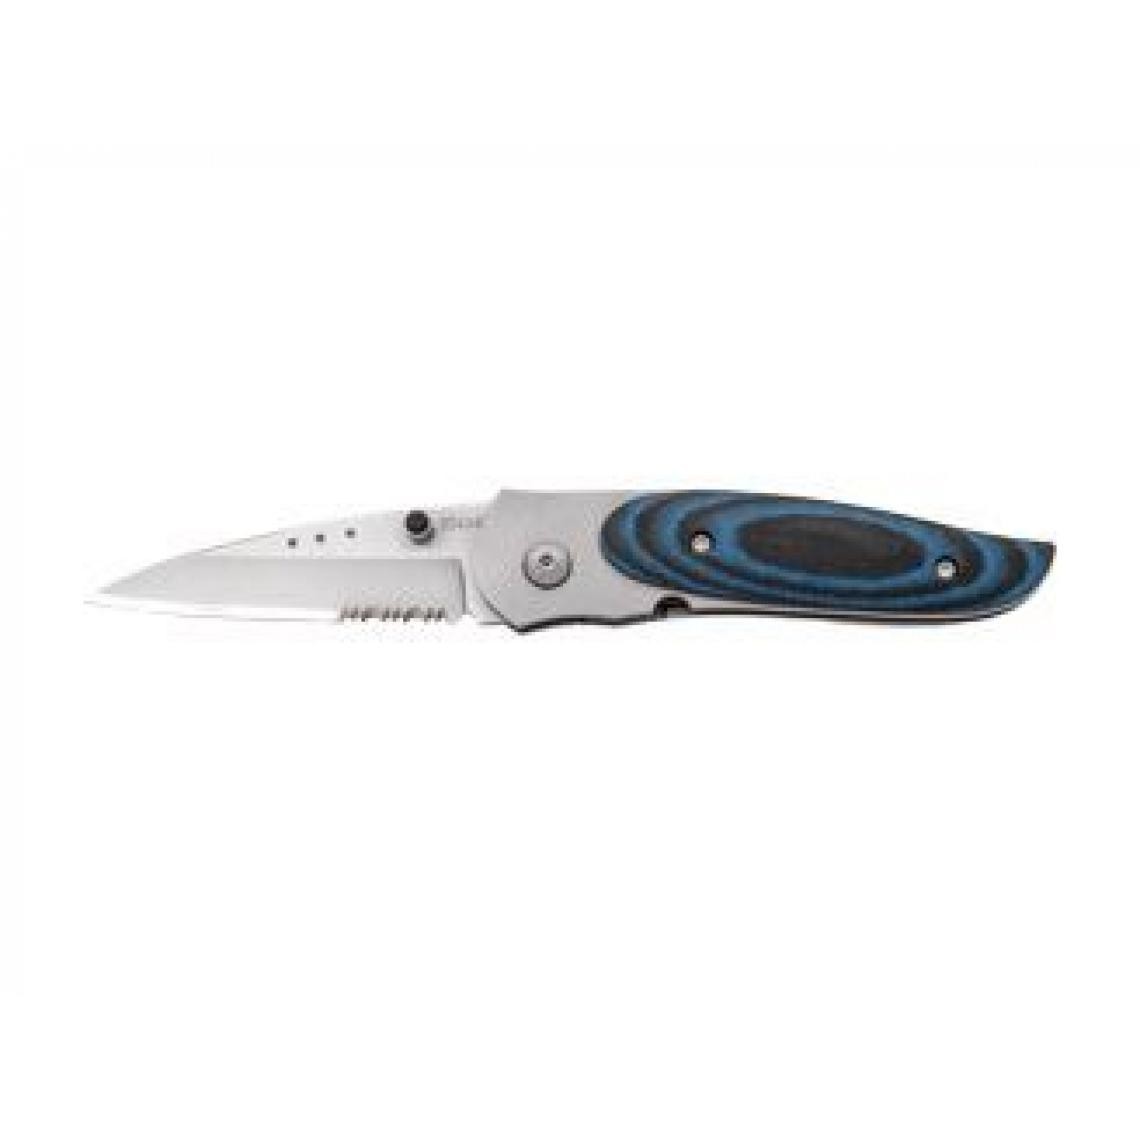 Crkt - Crkt THE VIELE WASP SMALL 8011 COMBO - Outils de coupe